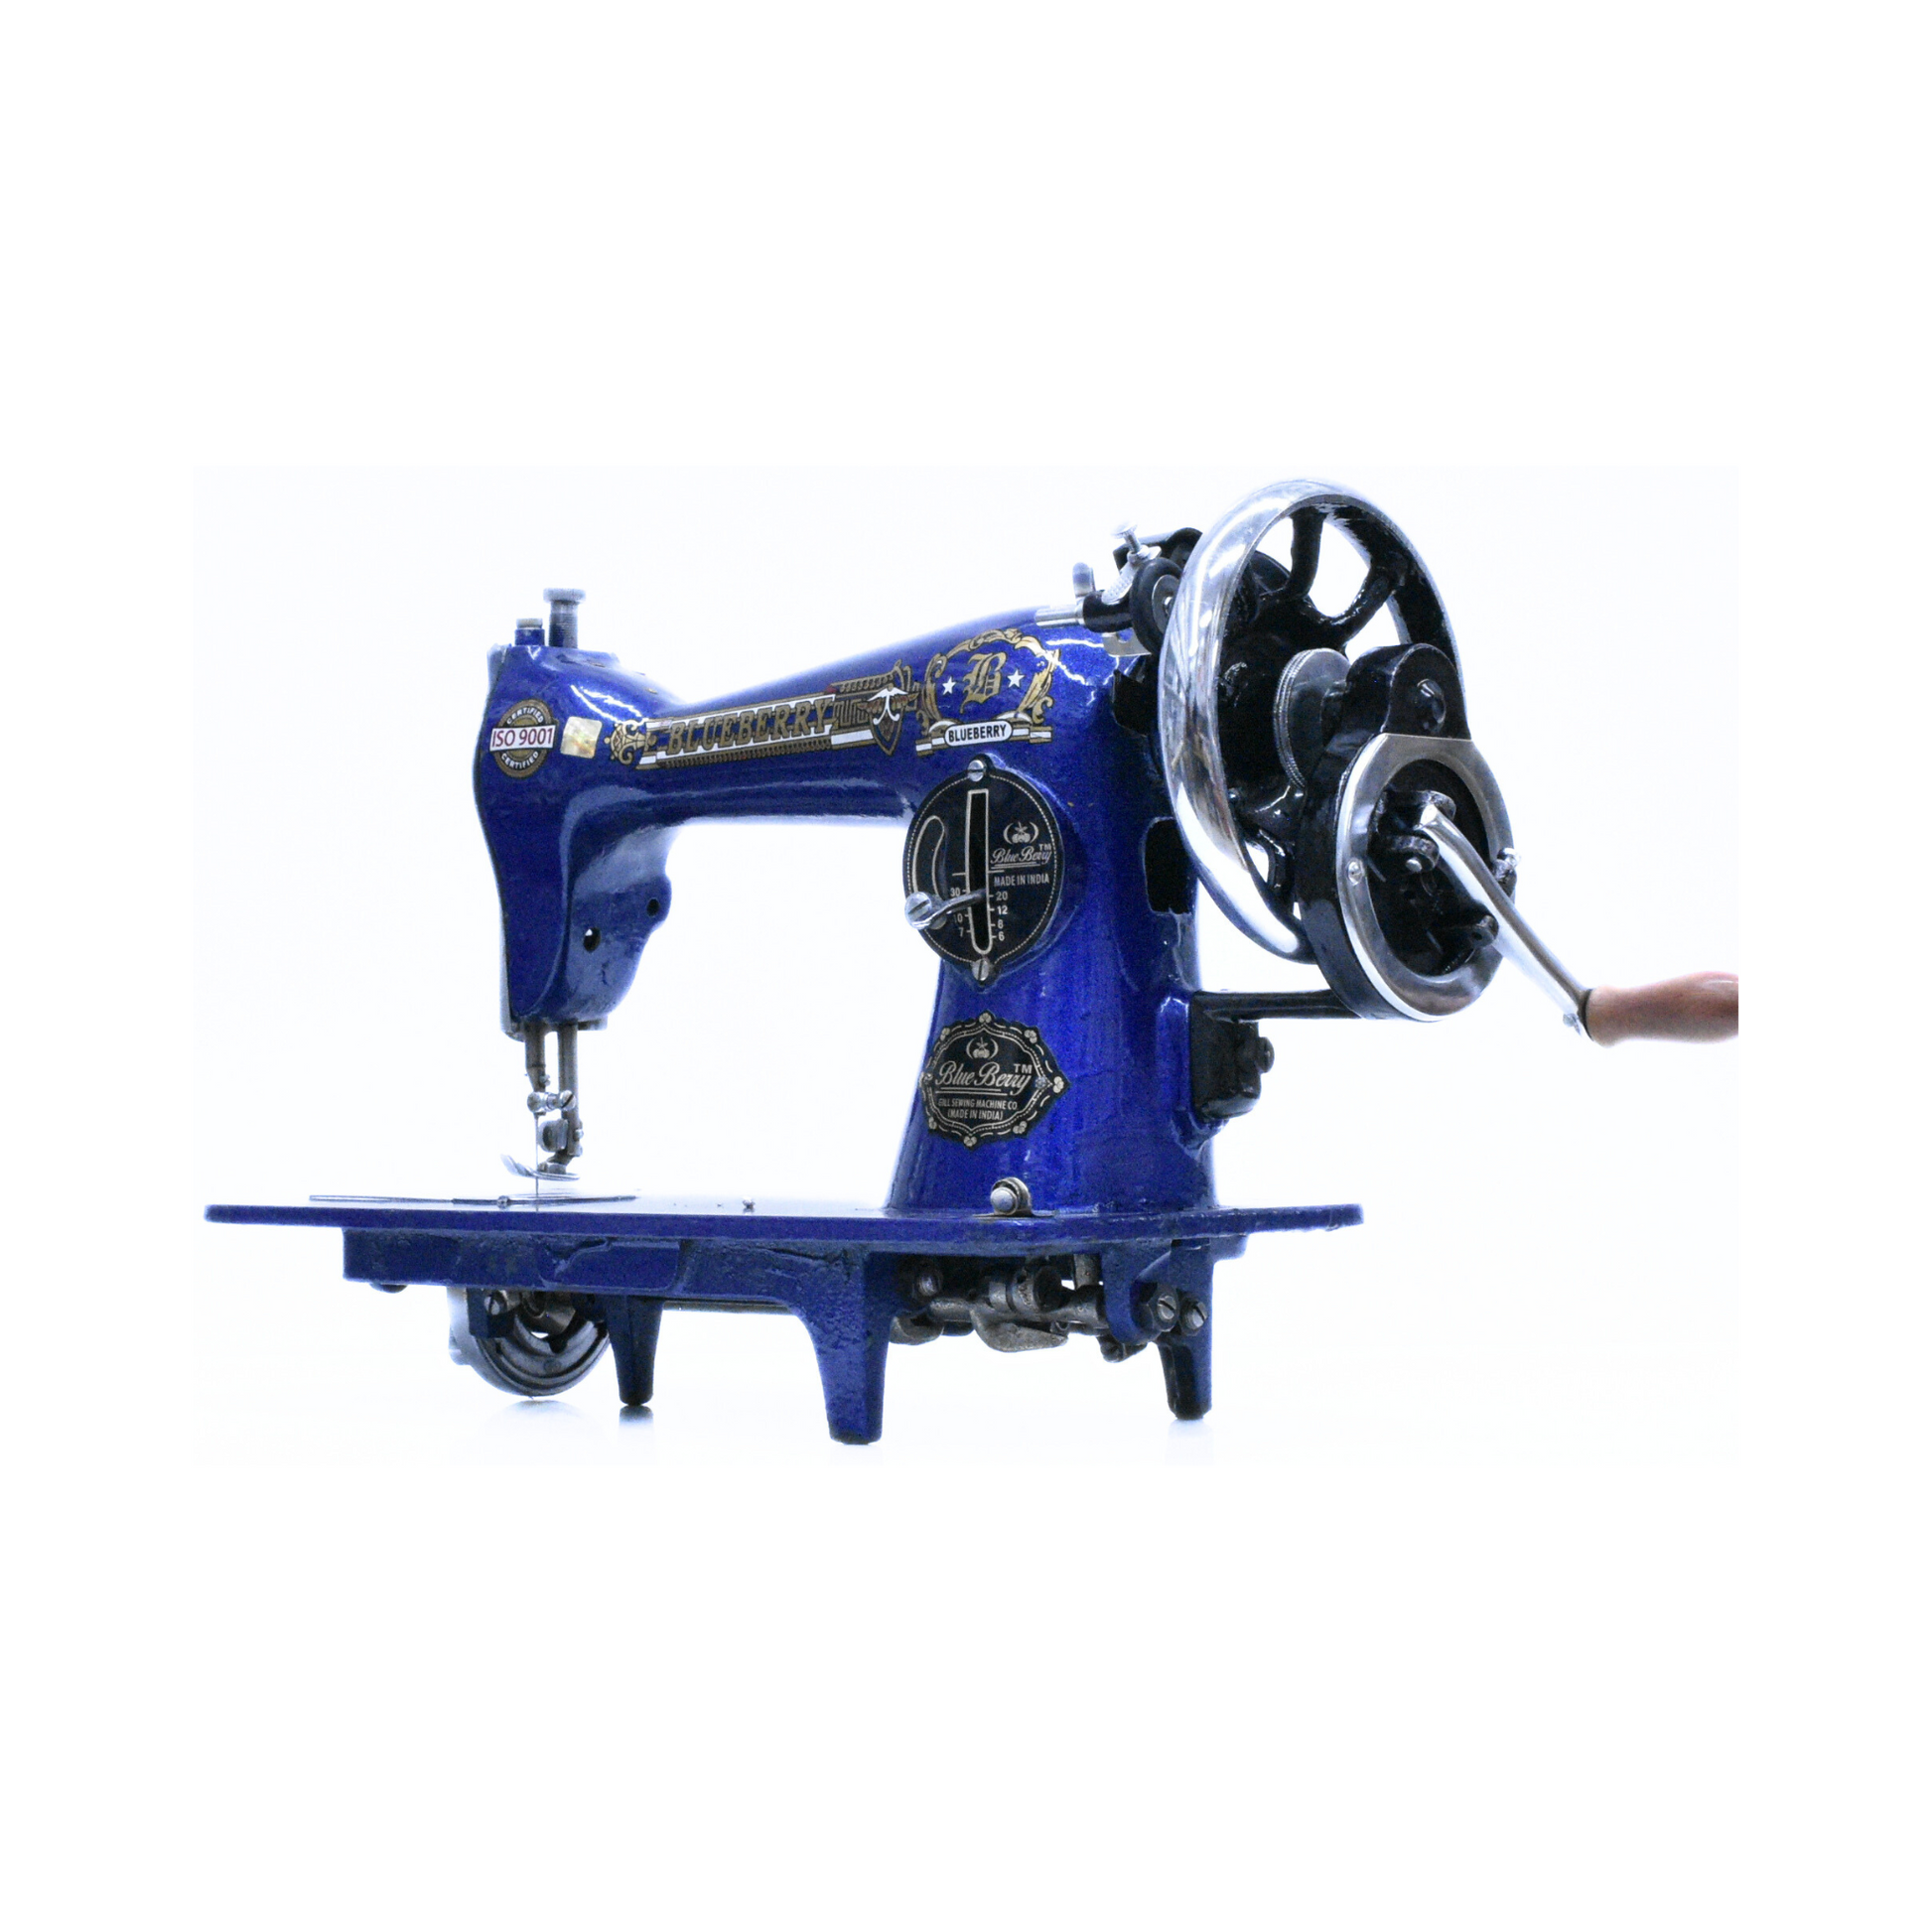 Blue berry - Vintage sewing machine - Blue - Side view